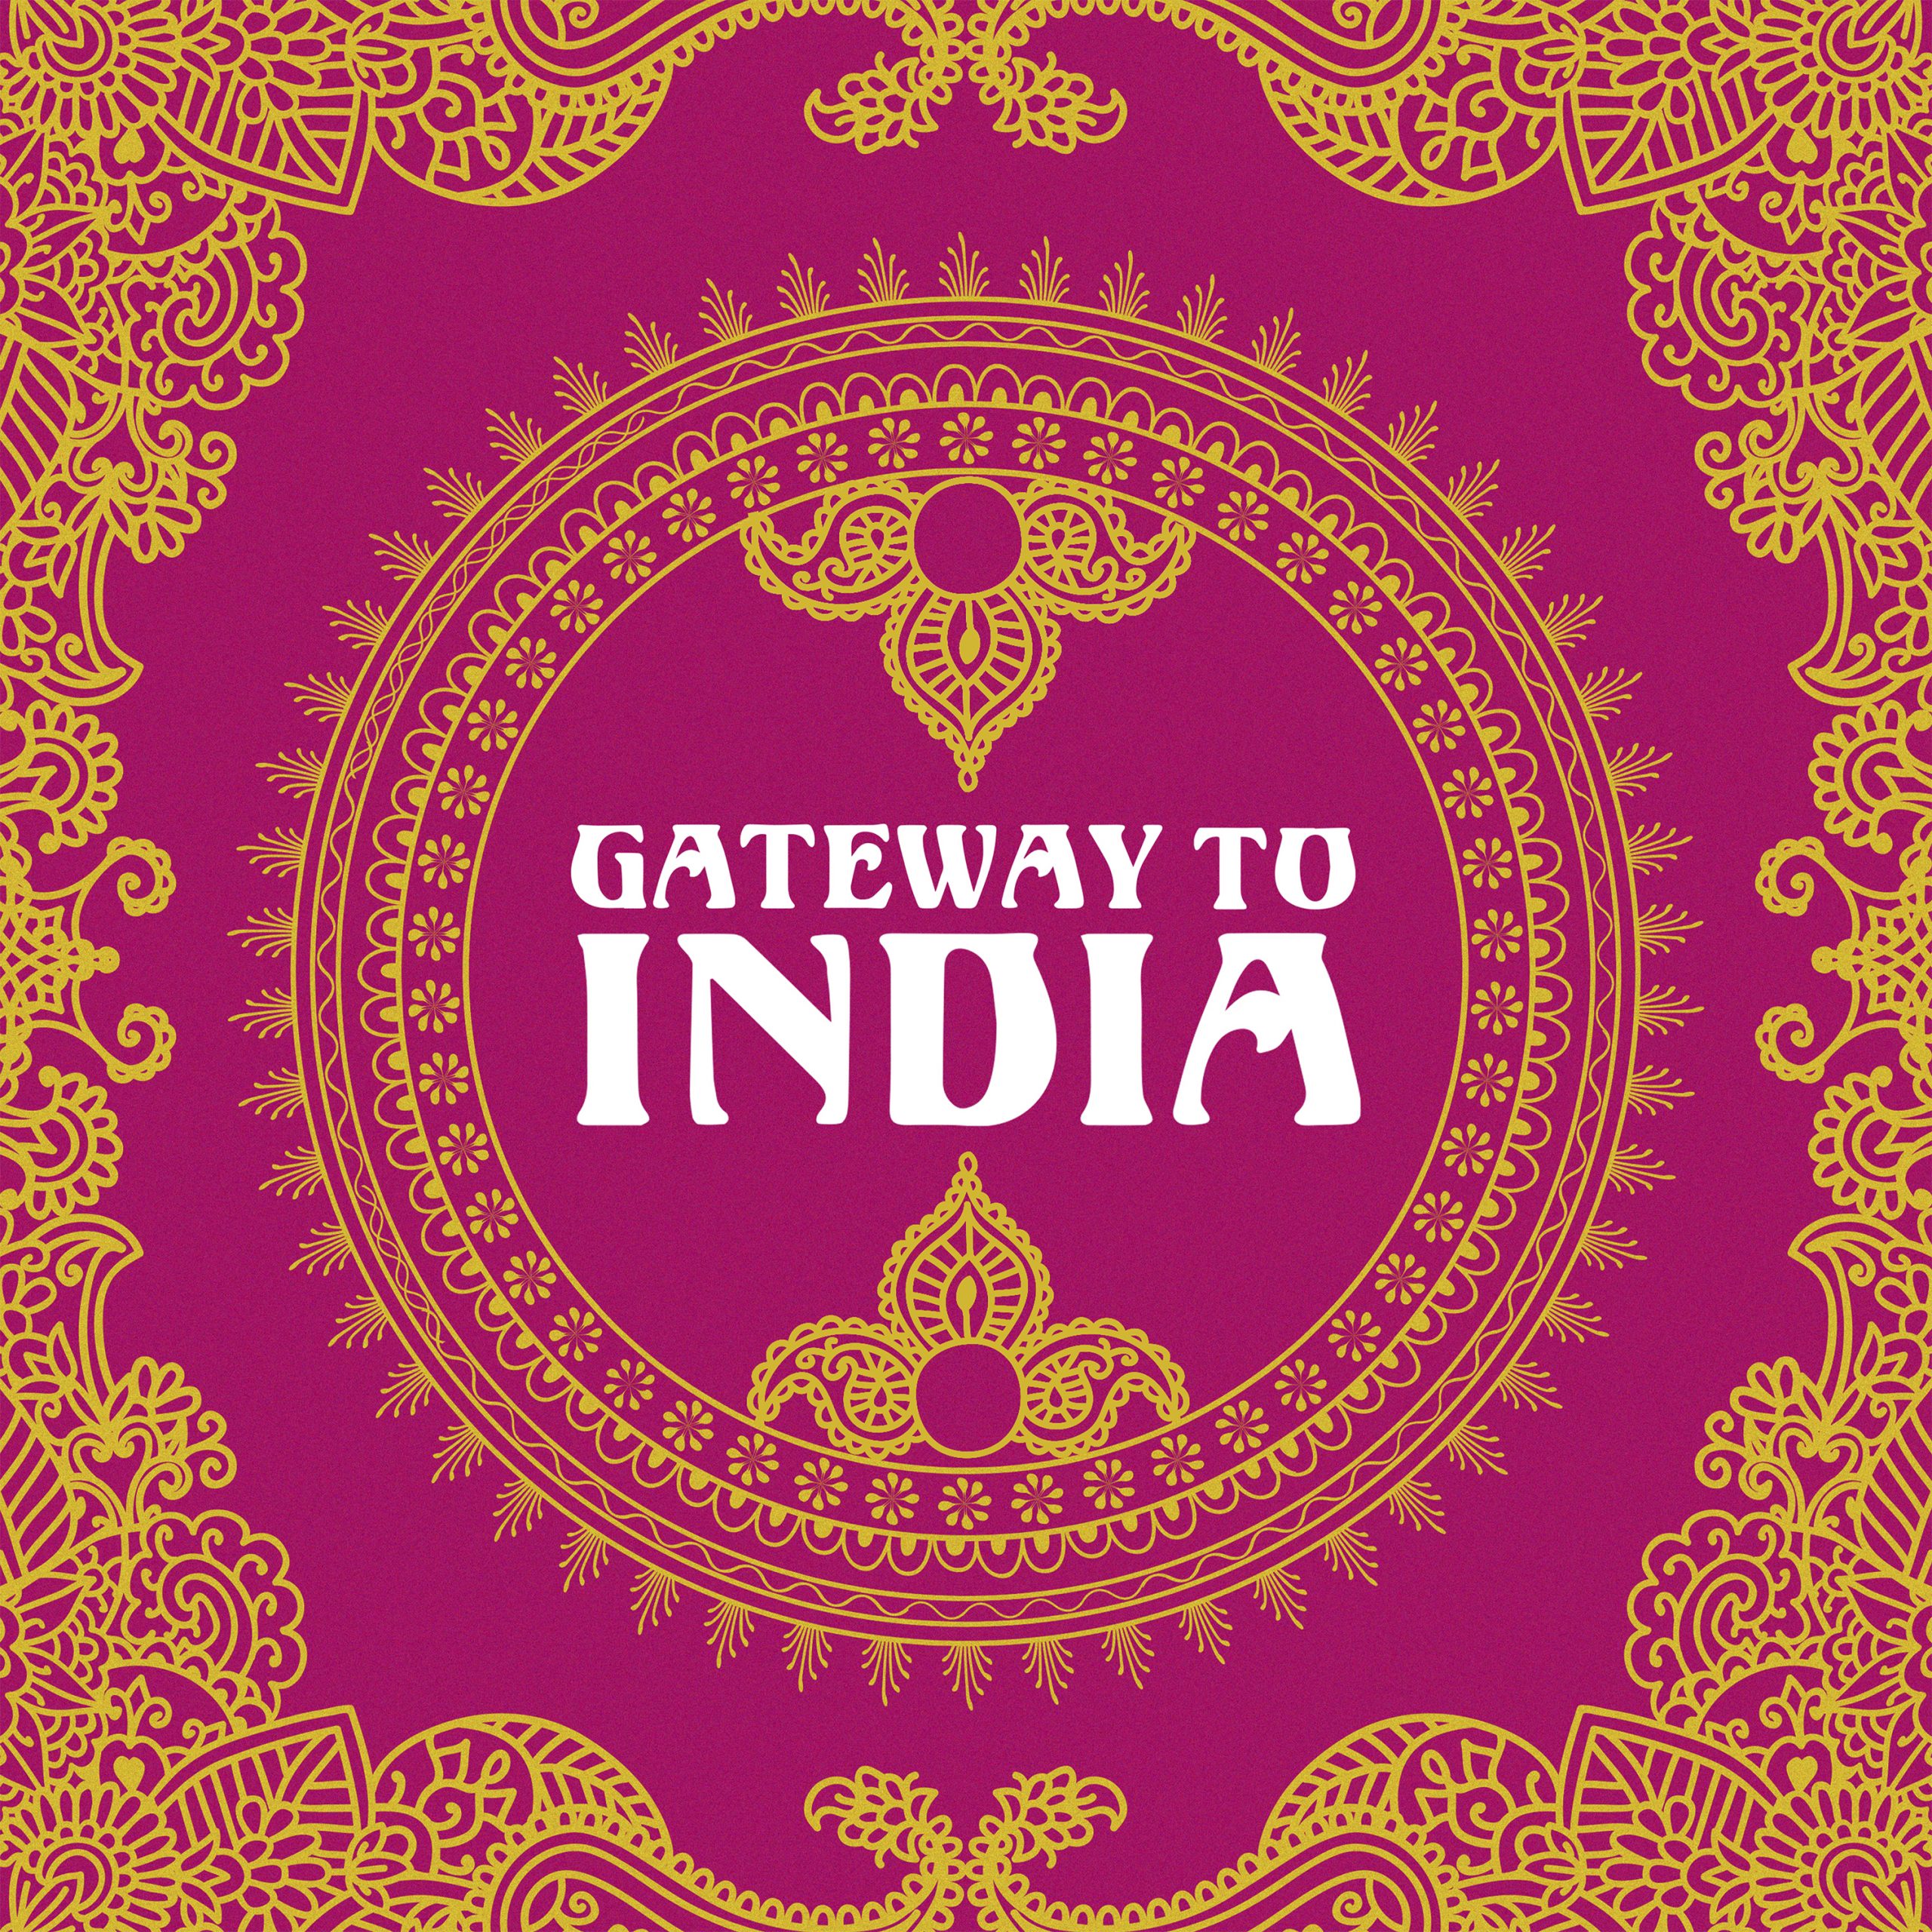 3634-FEAT-REL-GATEWAY-TO-INDIA_SET-A-FEATURED_01_Album_Artwork_3000x3000px